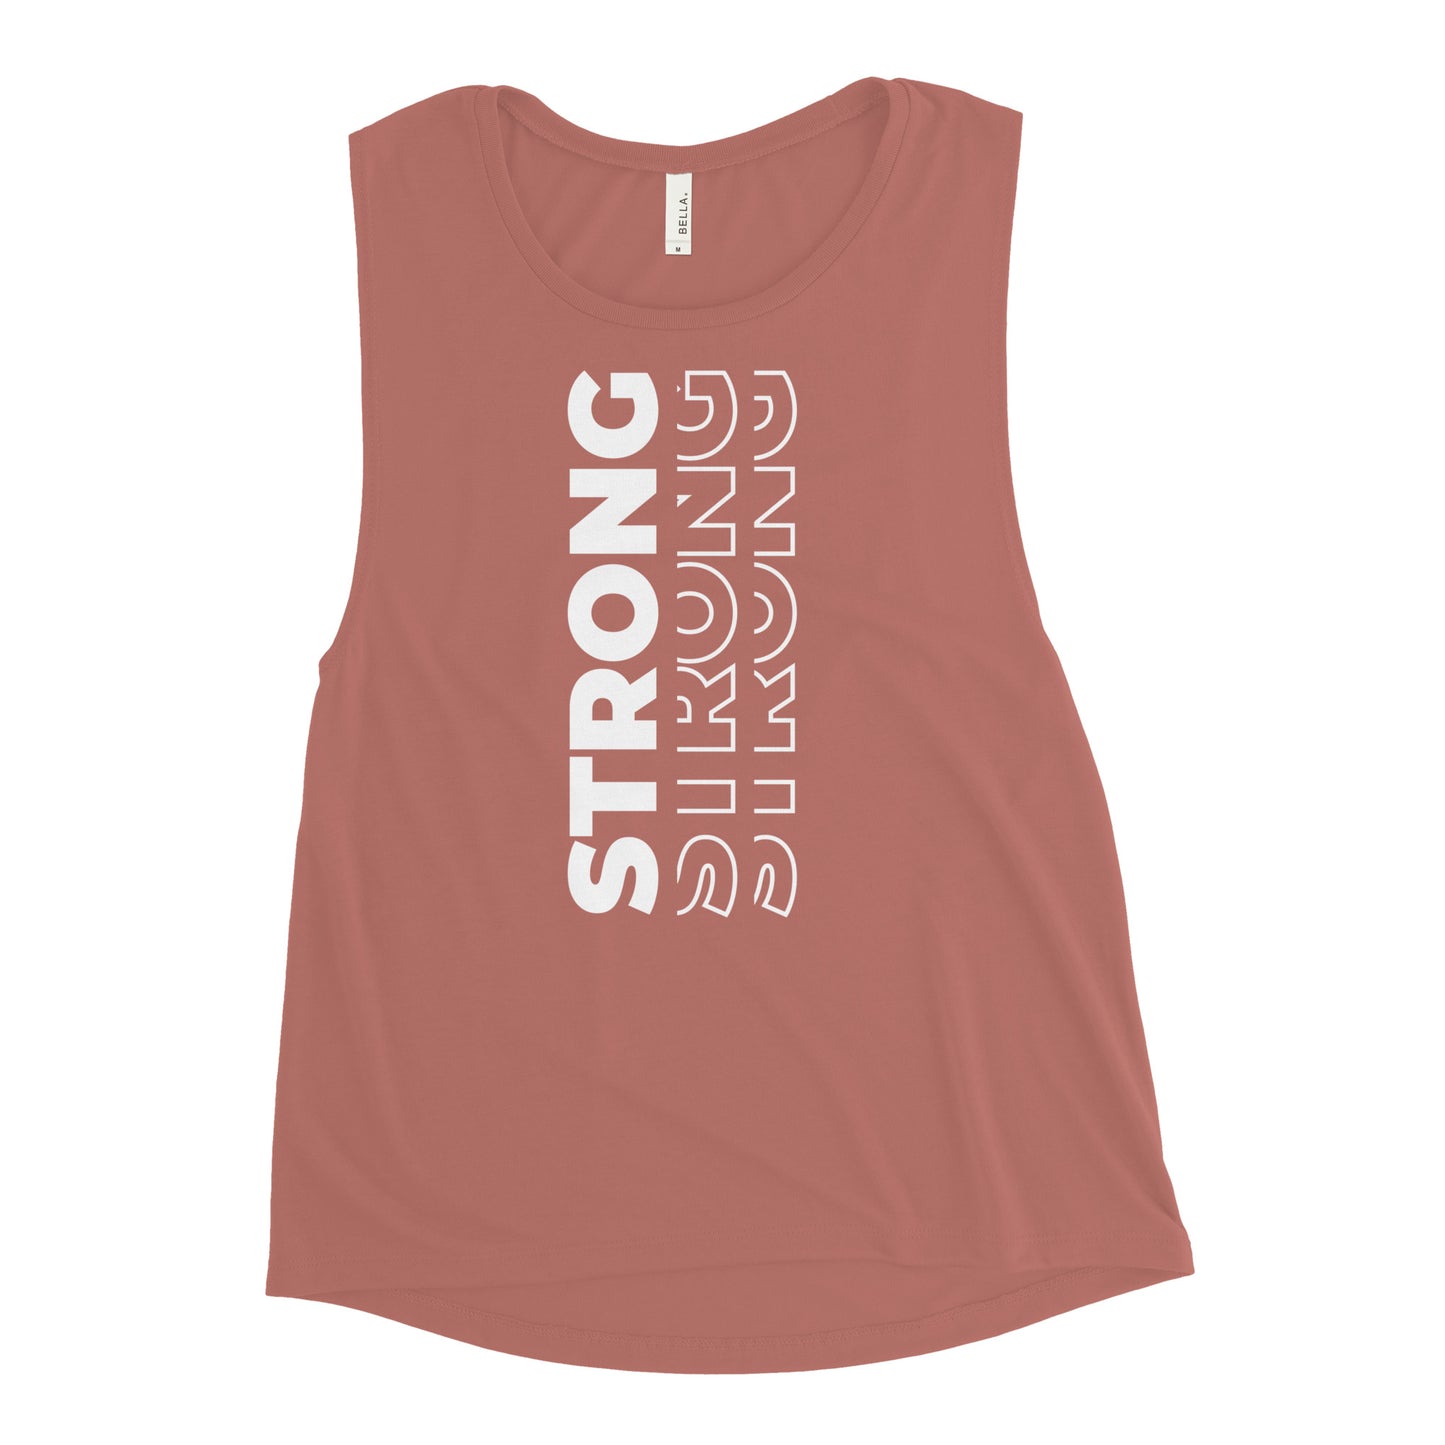 Strong. Strong. Strong Ladies’ Muscle Tank